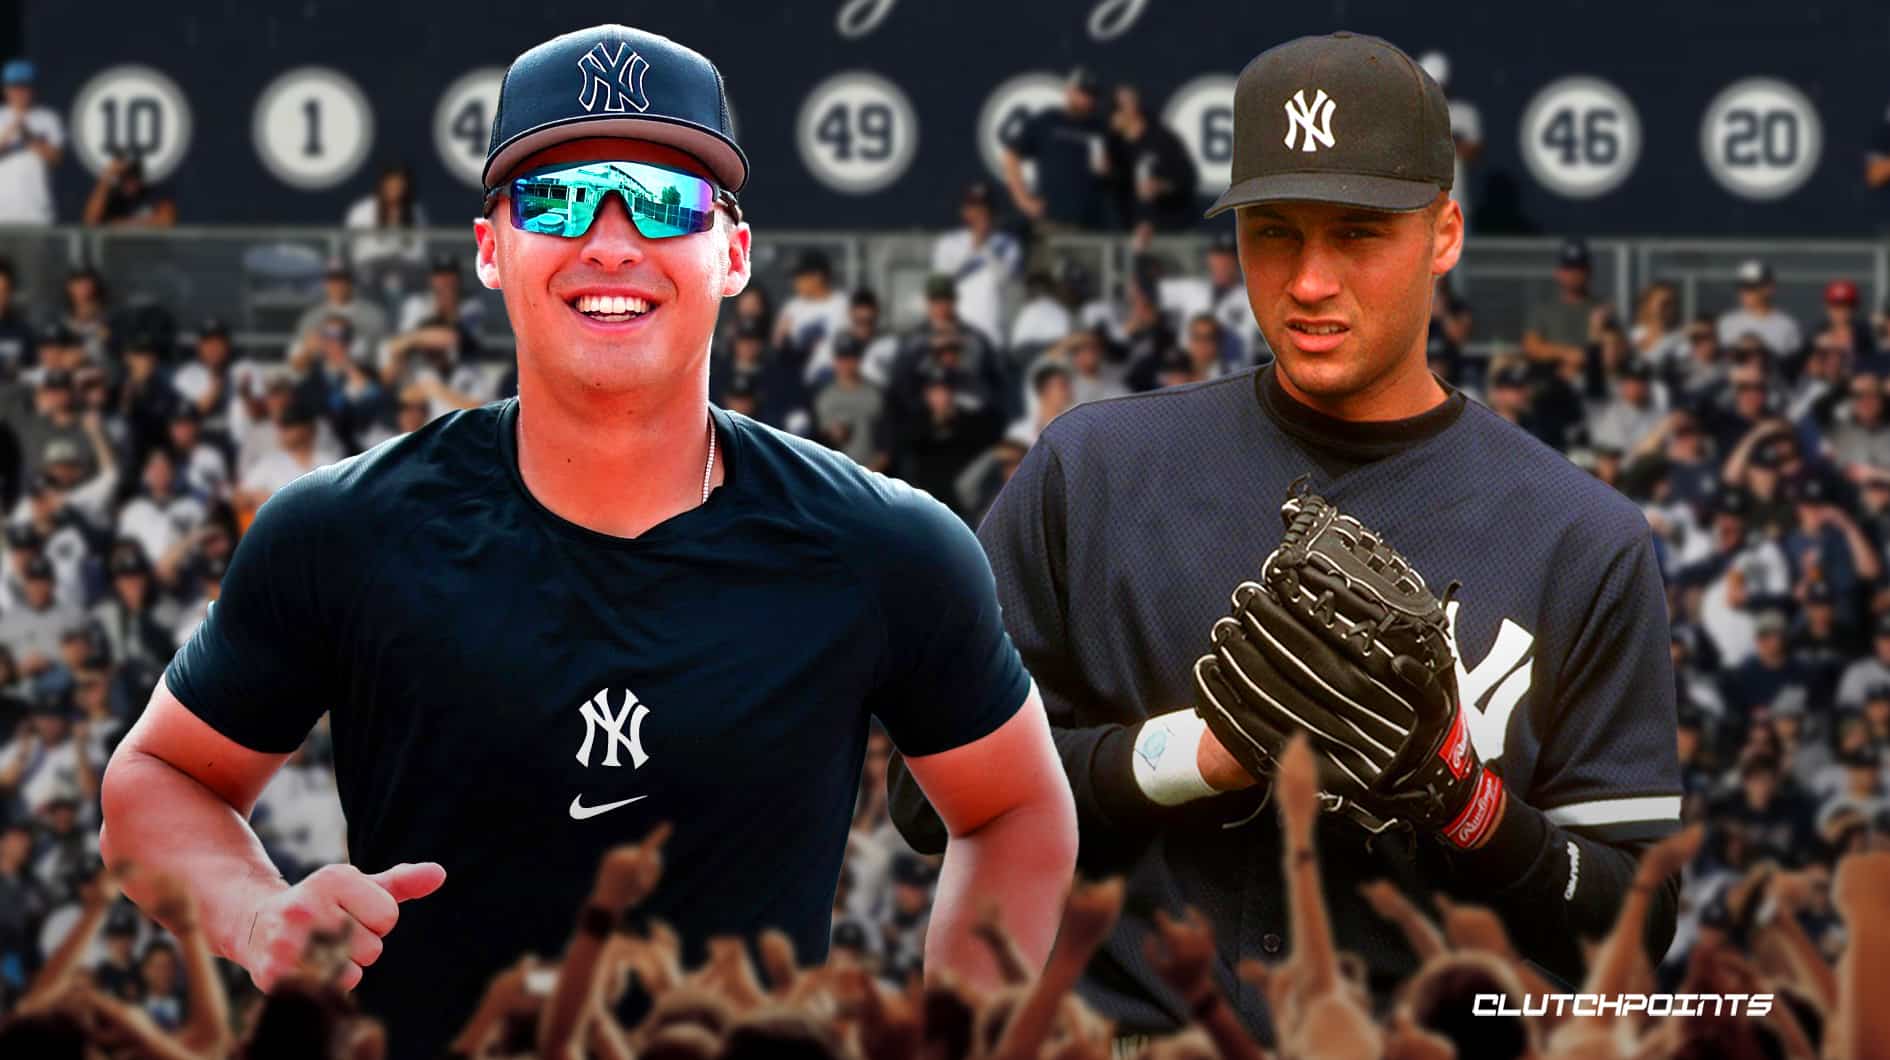 Anthony Volpe Reveals Disquiet In The Yankees Clubhouse